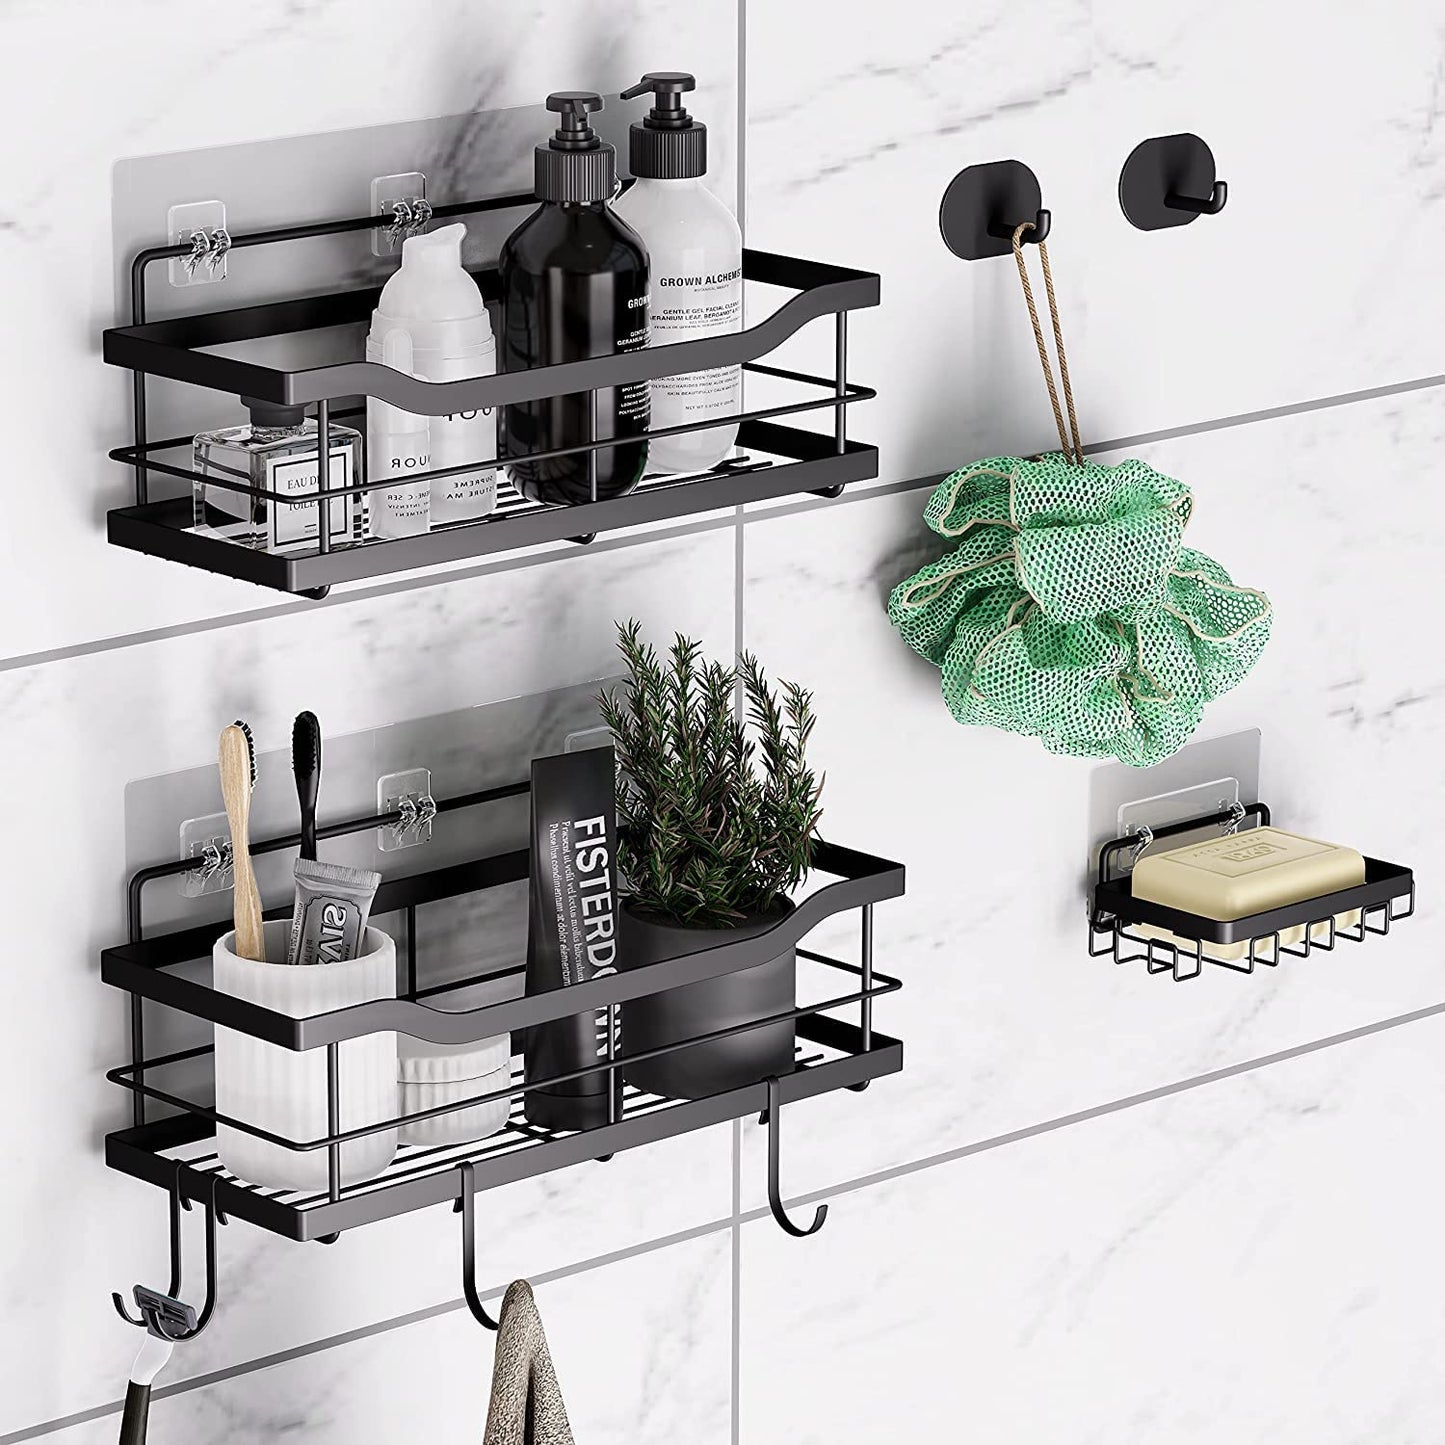 3-Pack Shower Caddy Shelf with Adhesives, 6 Hooks, Soap Dish, Wall Mounted Rustproof Bathroom Organizer Basket, No Drilling, 304 Stainless Steel Storage Rack.(?Matte Black)